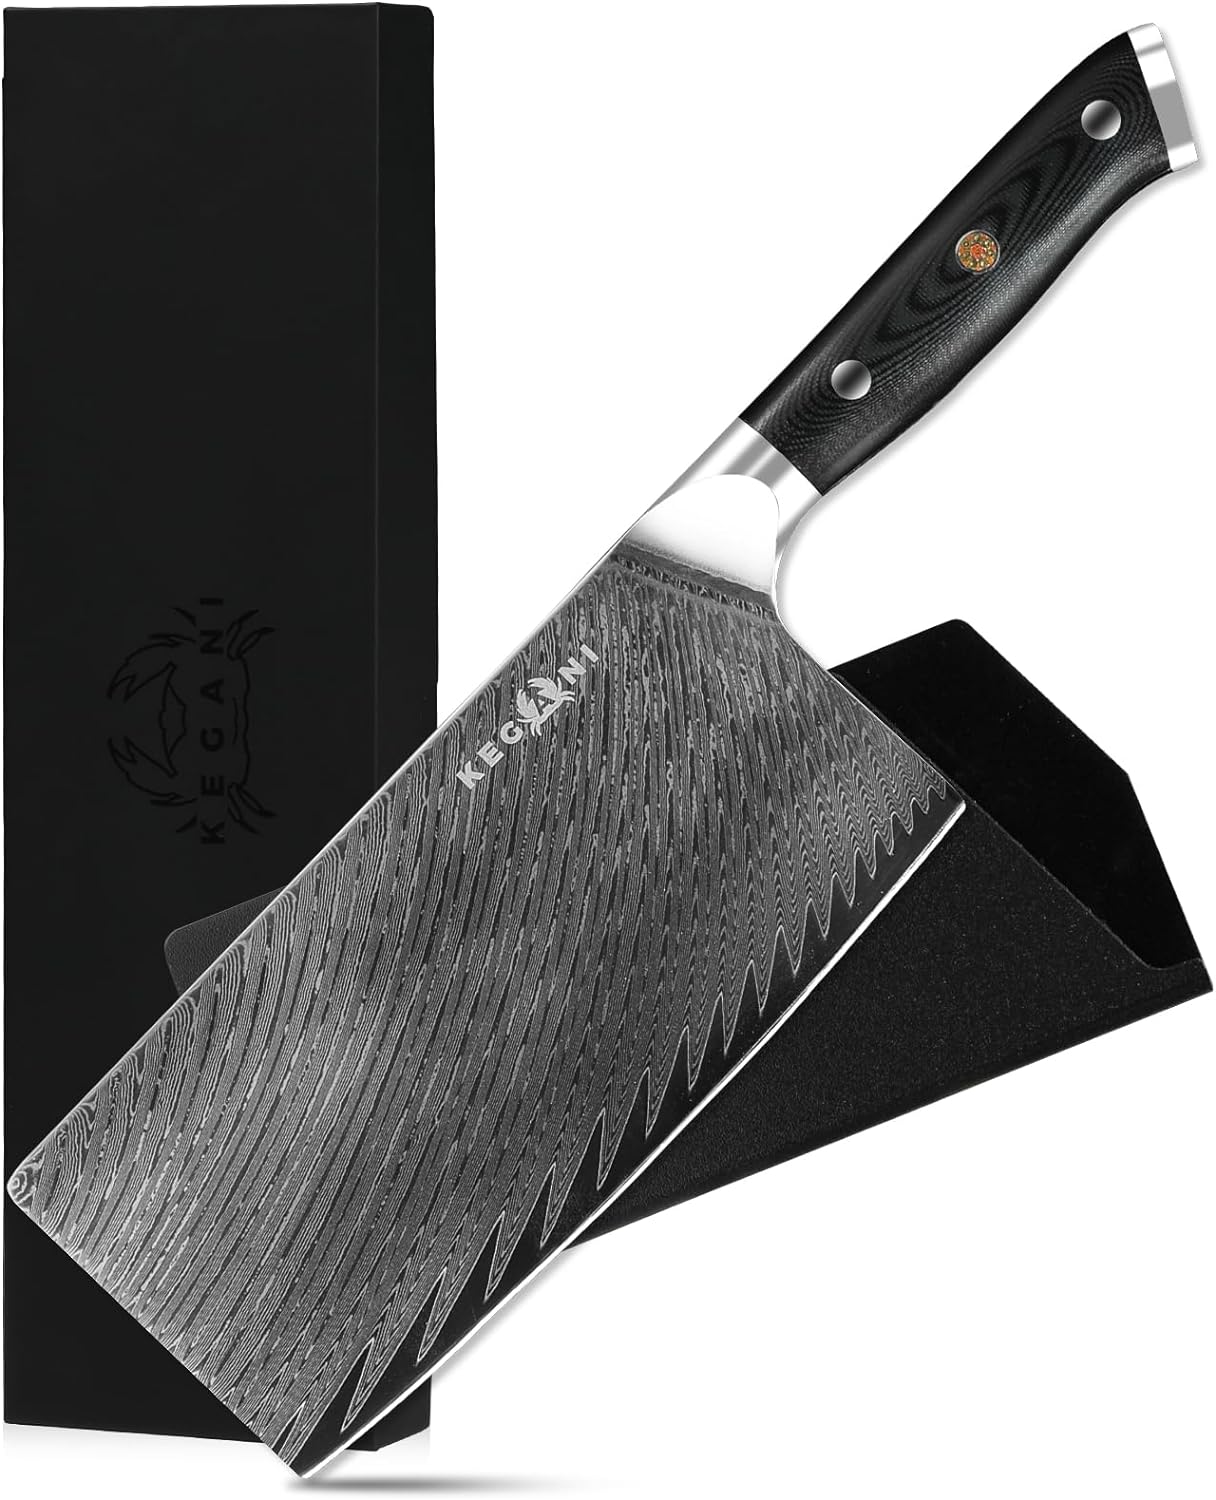 Kegani Meat Cleaver Knife 7 Inch - Damascus 73 Layers AUS-10 Steel Core Butcher Knife - G10 Handle Chinese Knife With Gift Box & Sheath